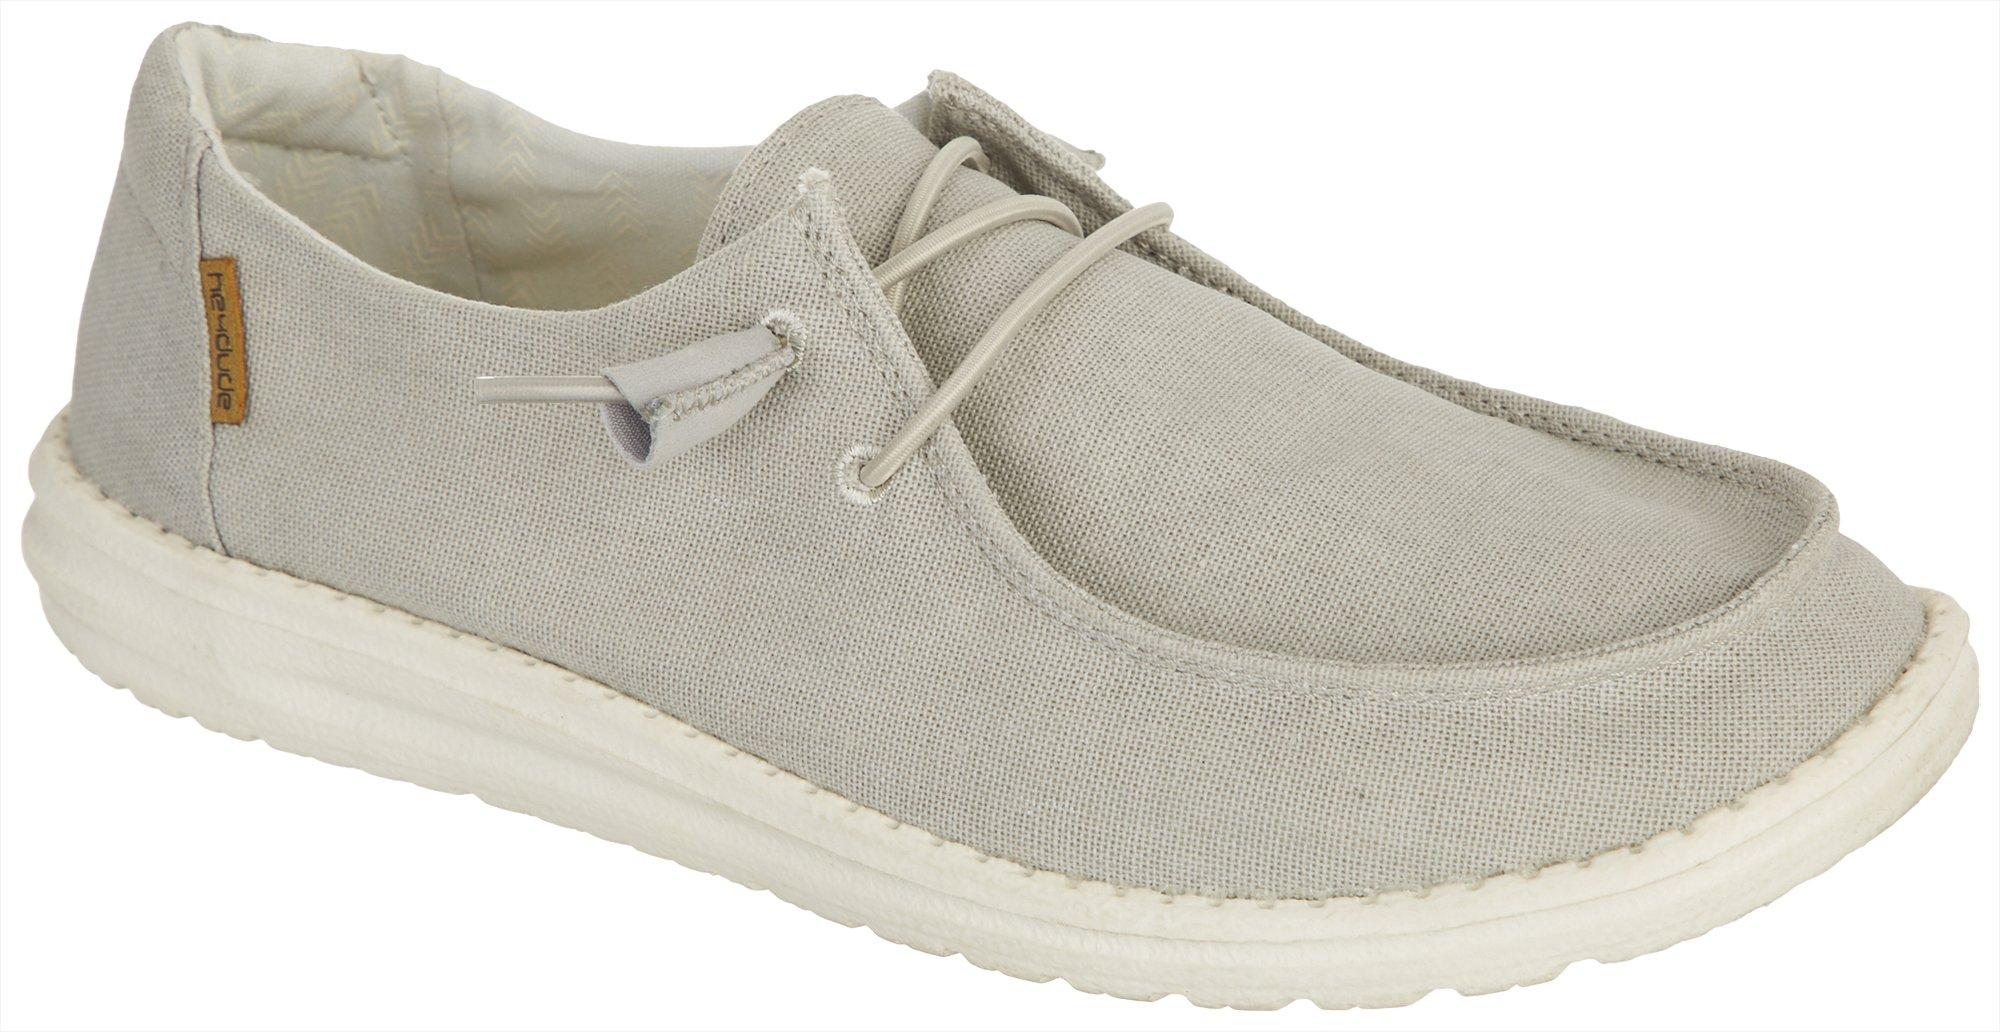 Womens Wendy Solid Washable Slip On Casual Shoes